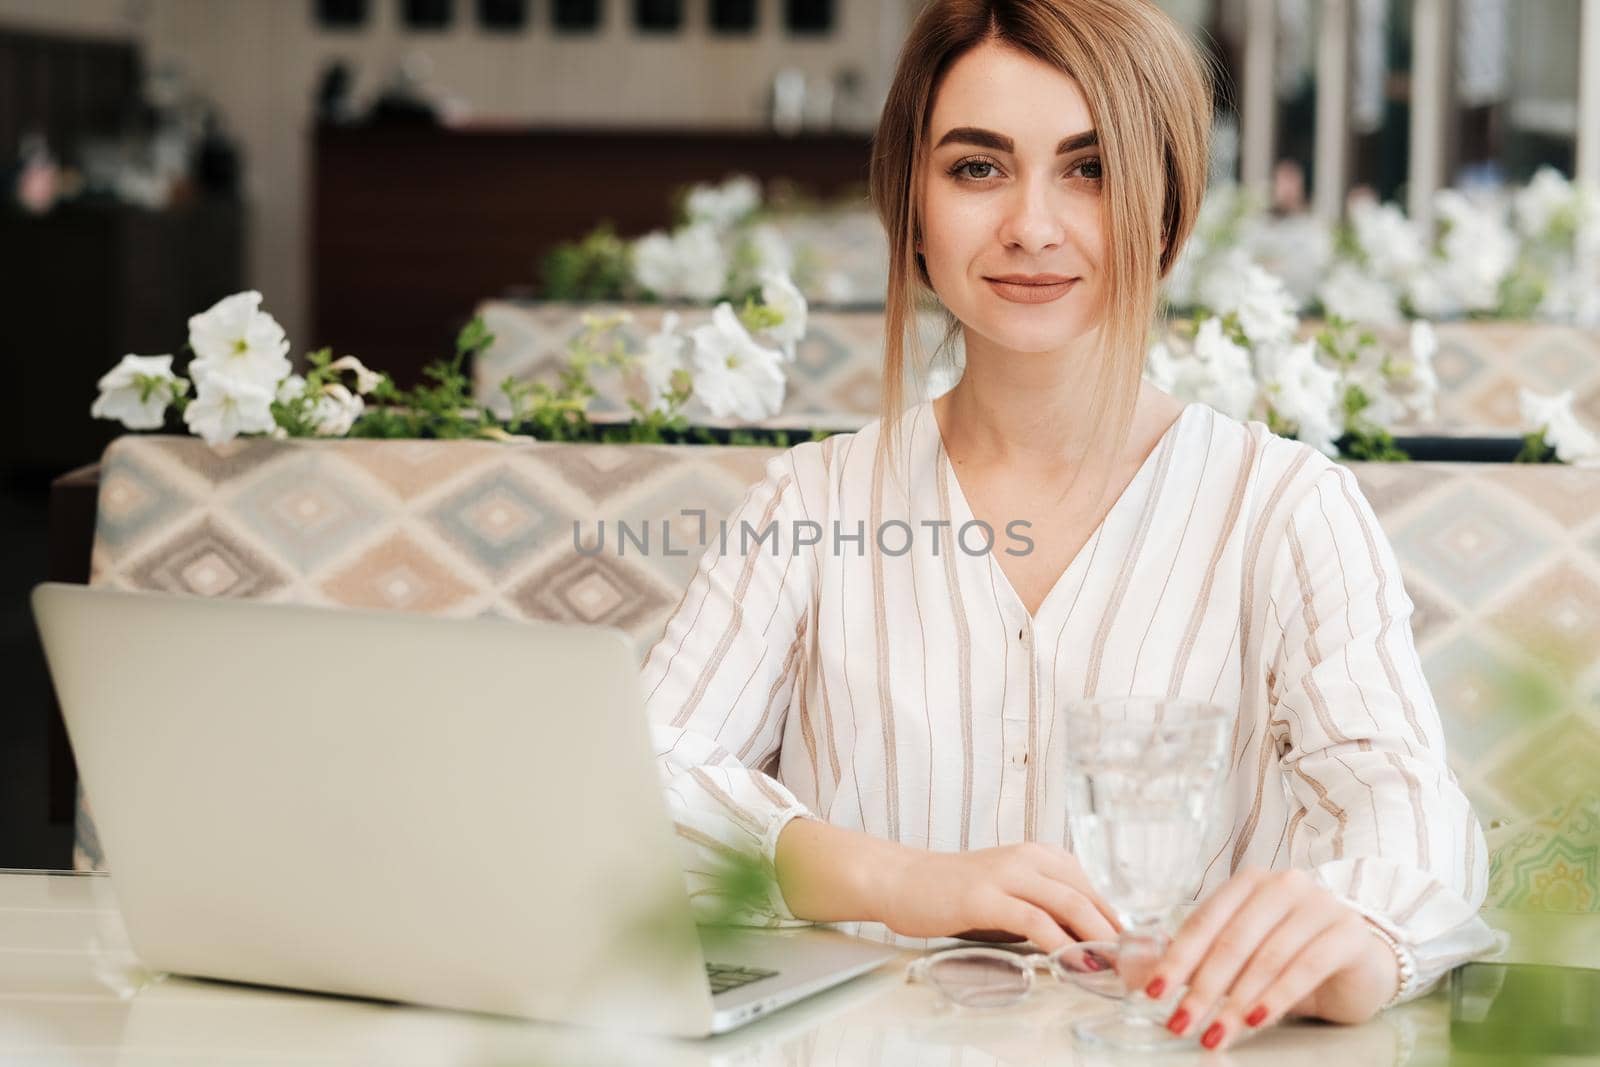 Confident Young Woman Looking Straight Into Camera, Female Working on Laptop While Having Lunch in Restaurant